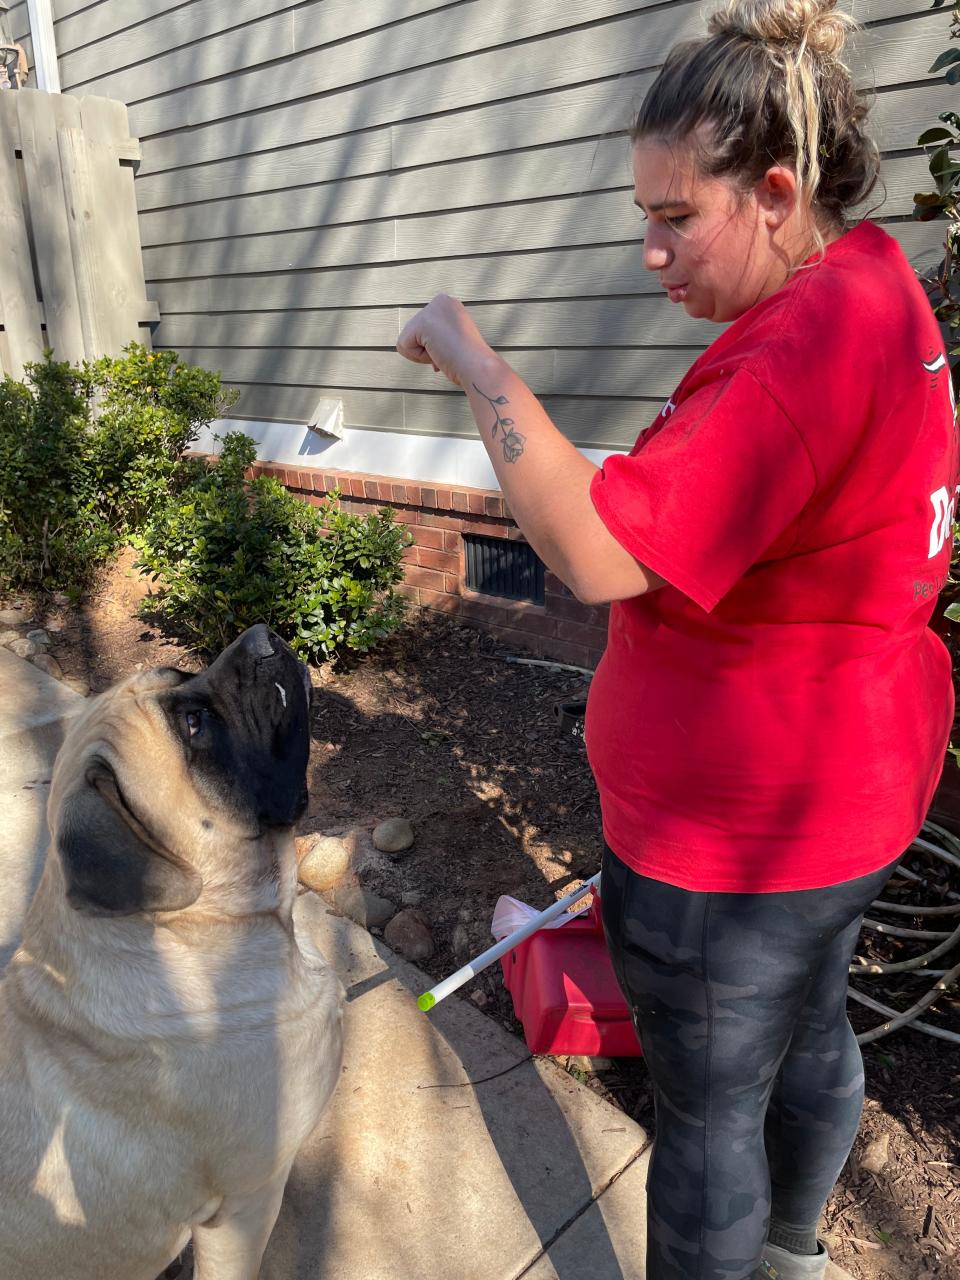 Cheyenna Cadle with Call of Dooty befriends an English mastiff named Amos during a service call in Evans.